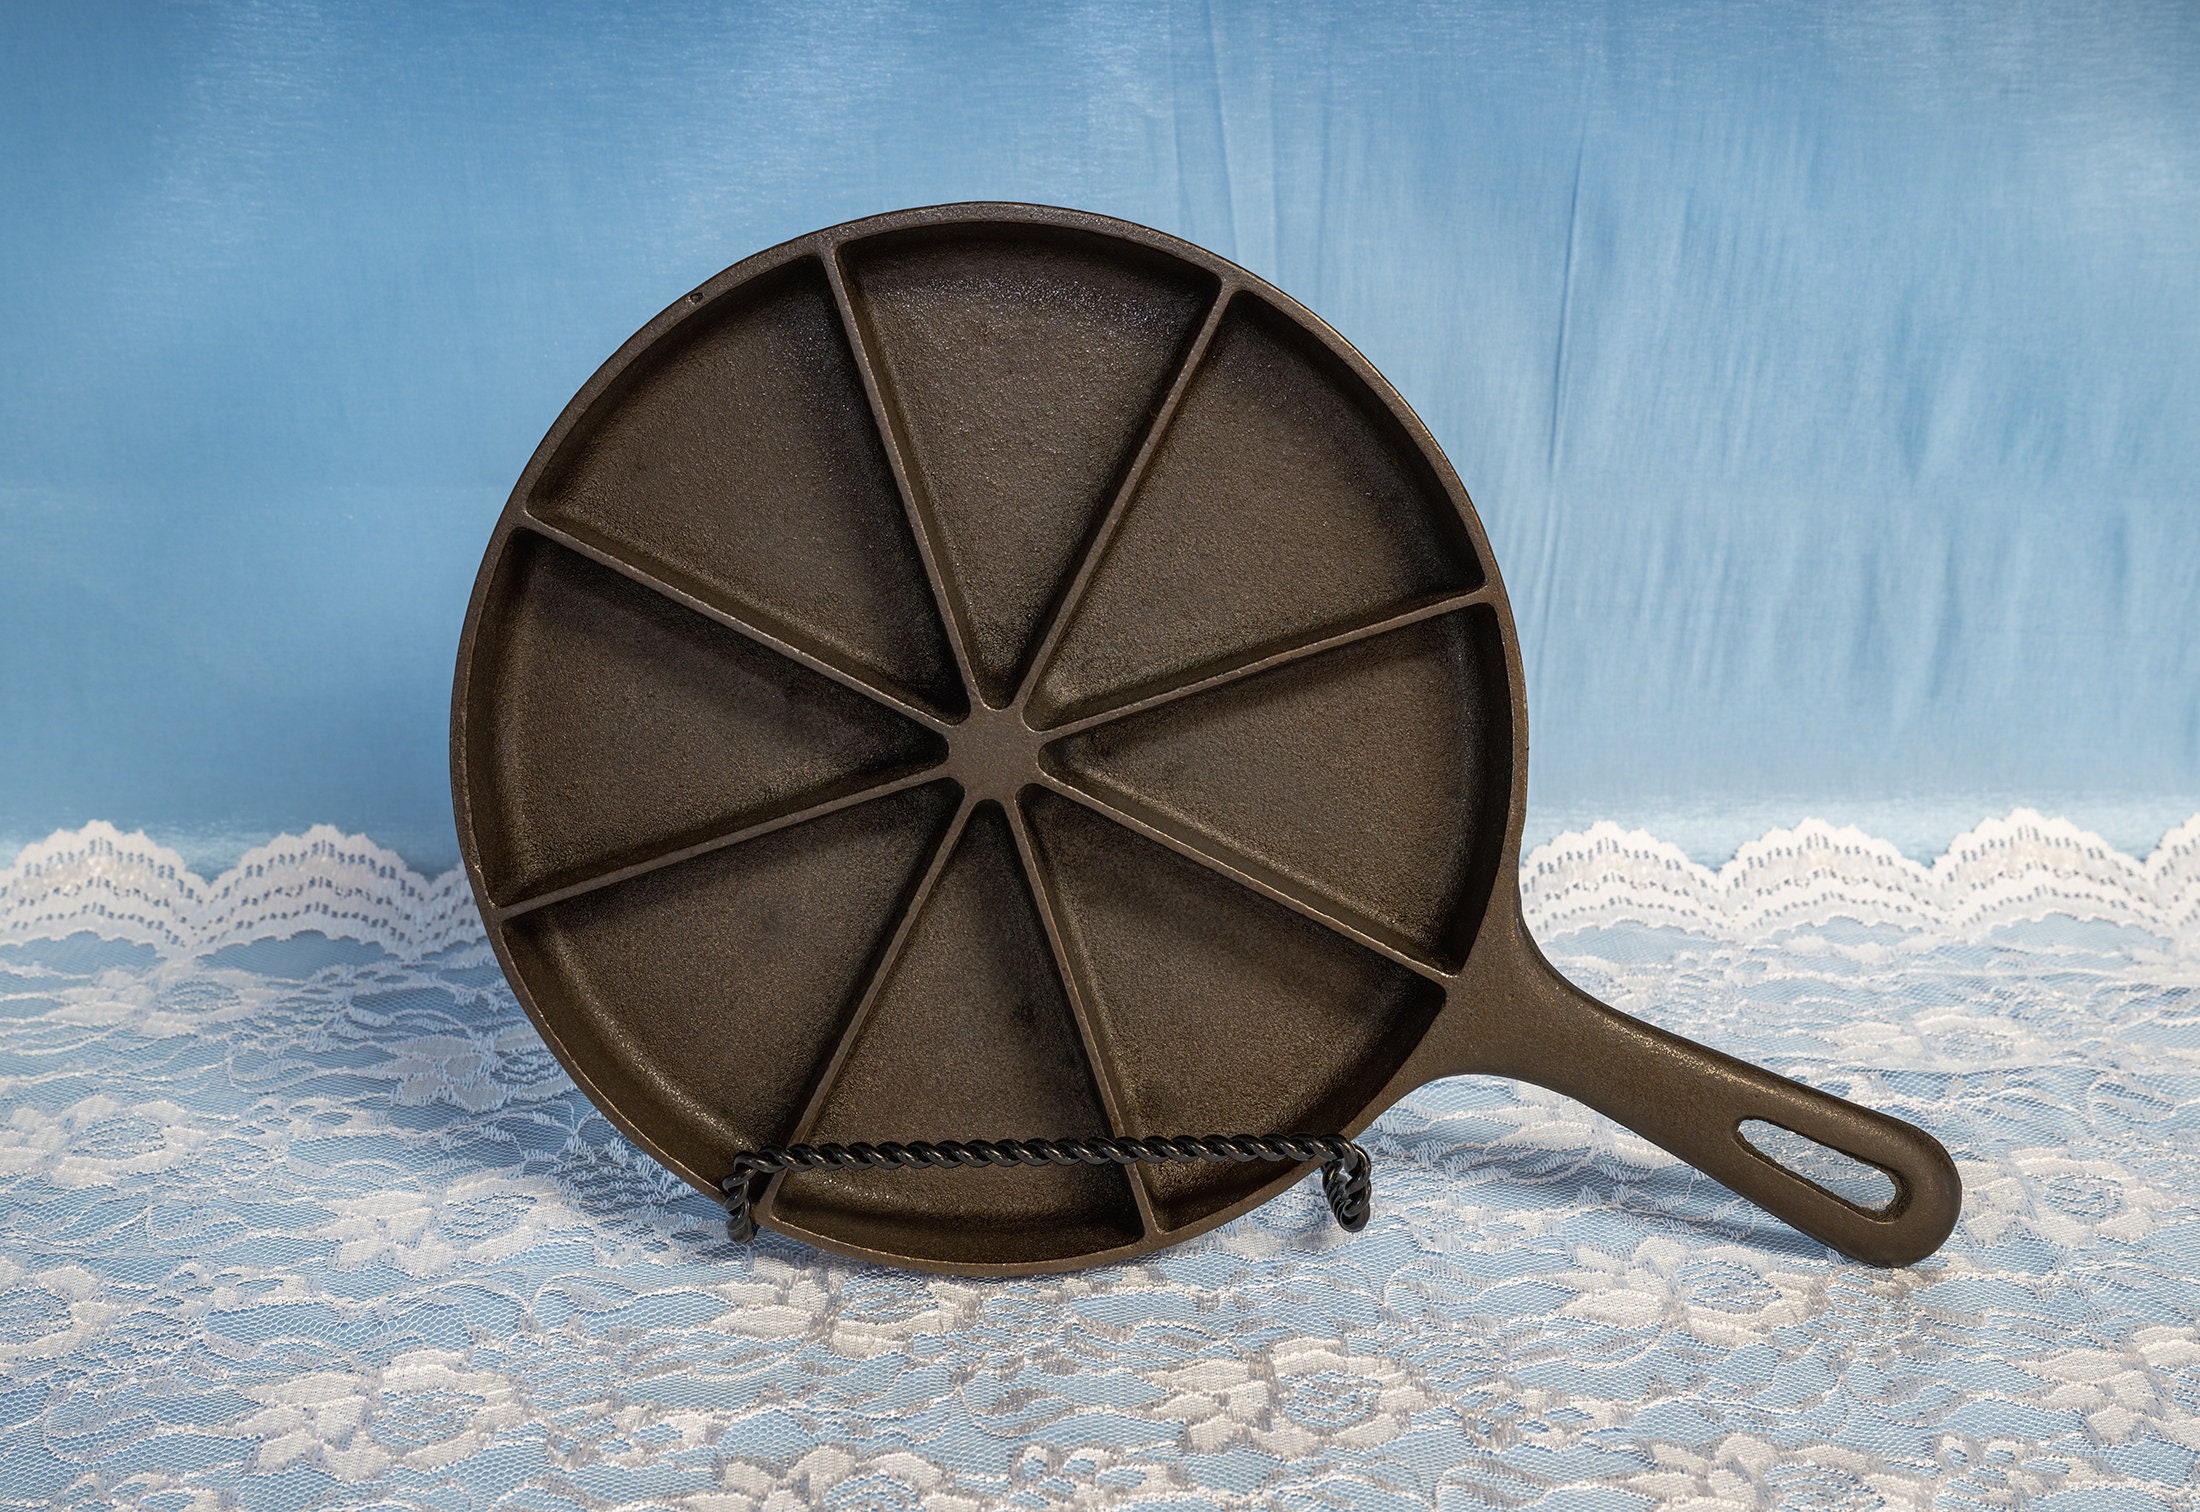 1920 Cast Iron Cornbread Pan With Pat' D. July, 6, 1920 Marked